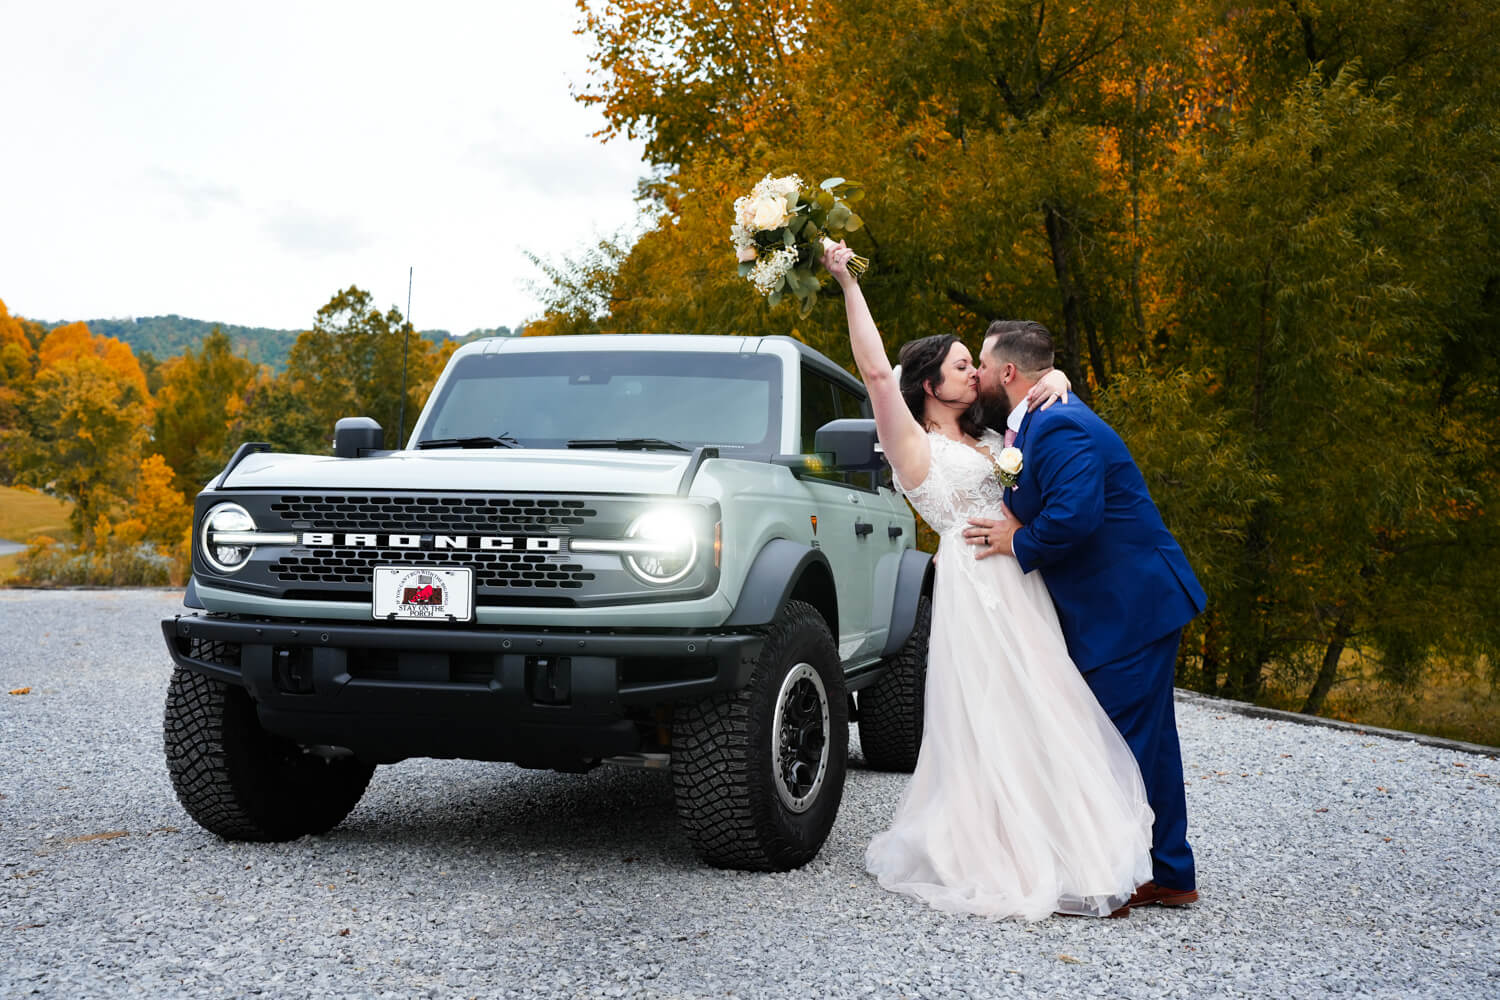 Bride holding up her bouquet in joy as her groom kisses her by their new Ford Bronco in the fall in the Smoky Mountains